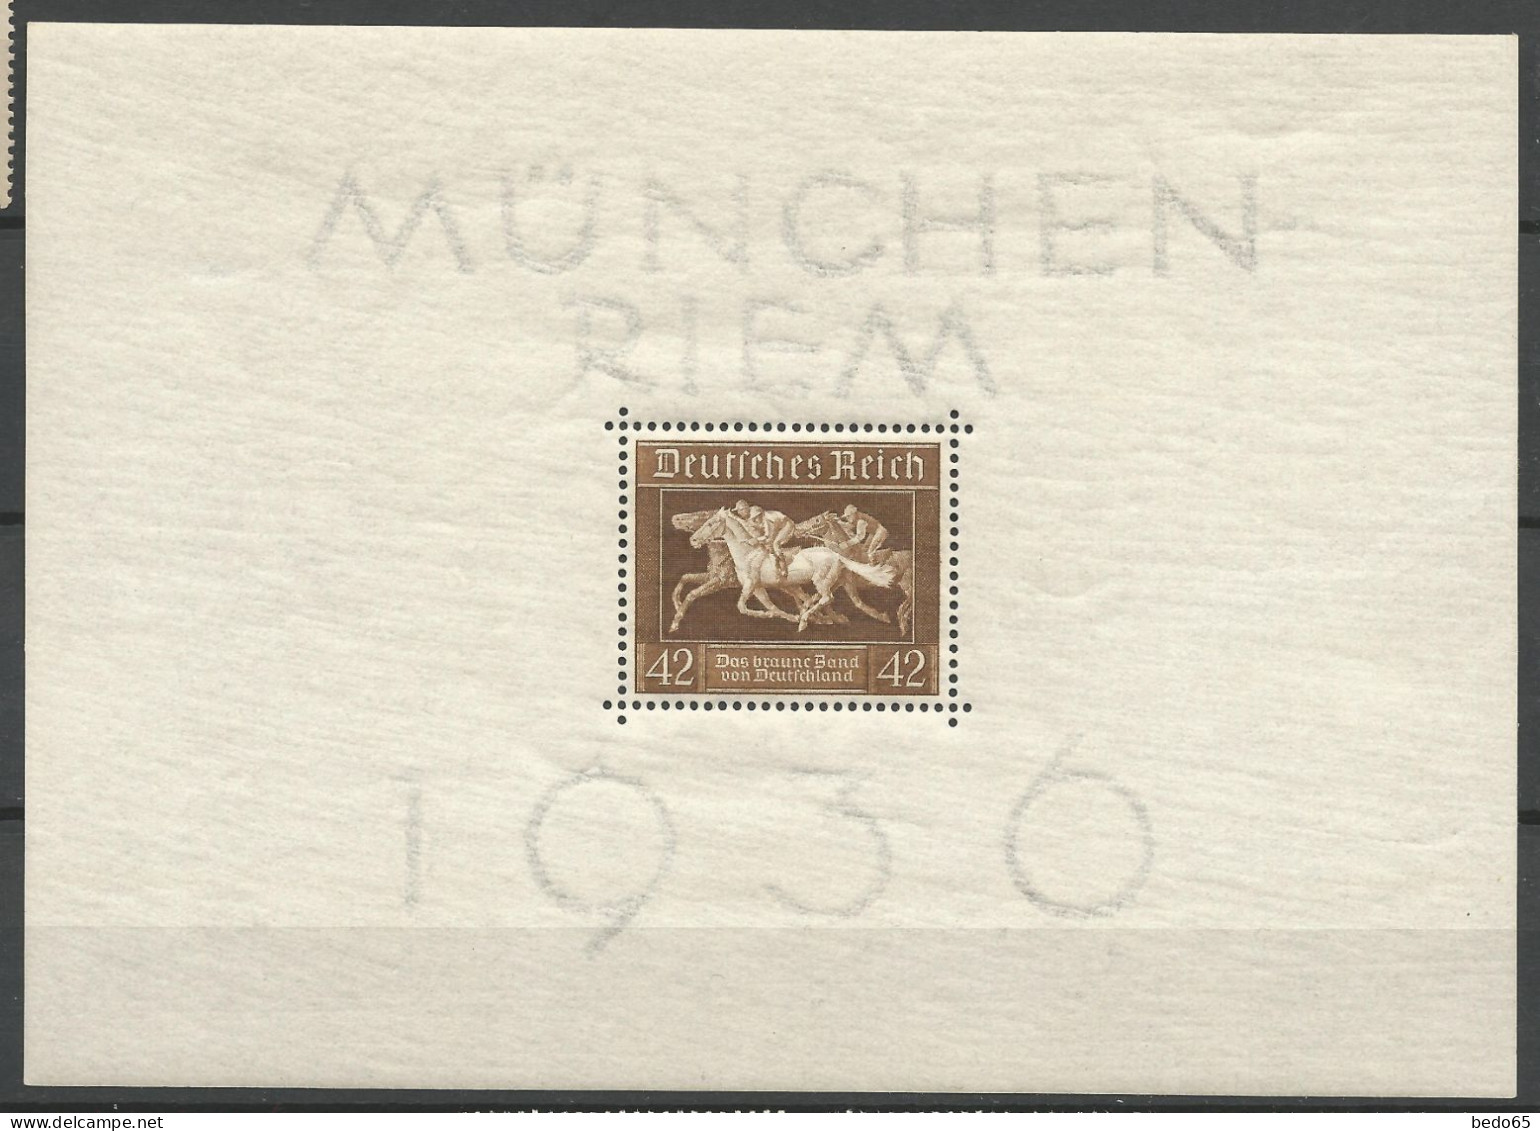 ALLEMAGNE Yvert Bloc N° 6  NEUF** LUXE SANS CHARNIERE / Hingeless / MNH - Blocchi